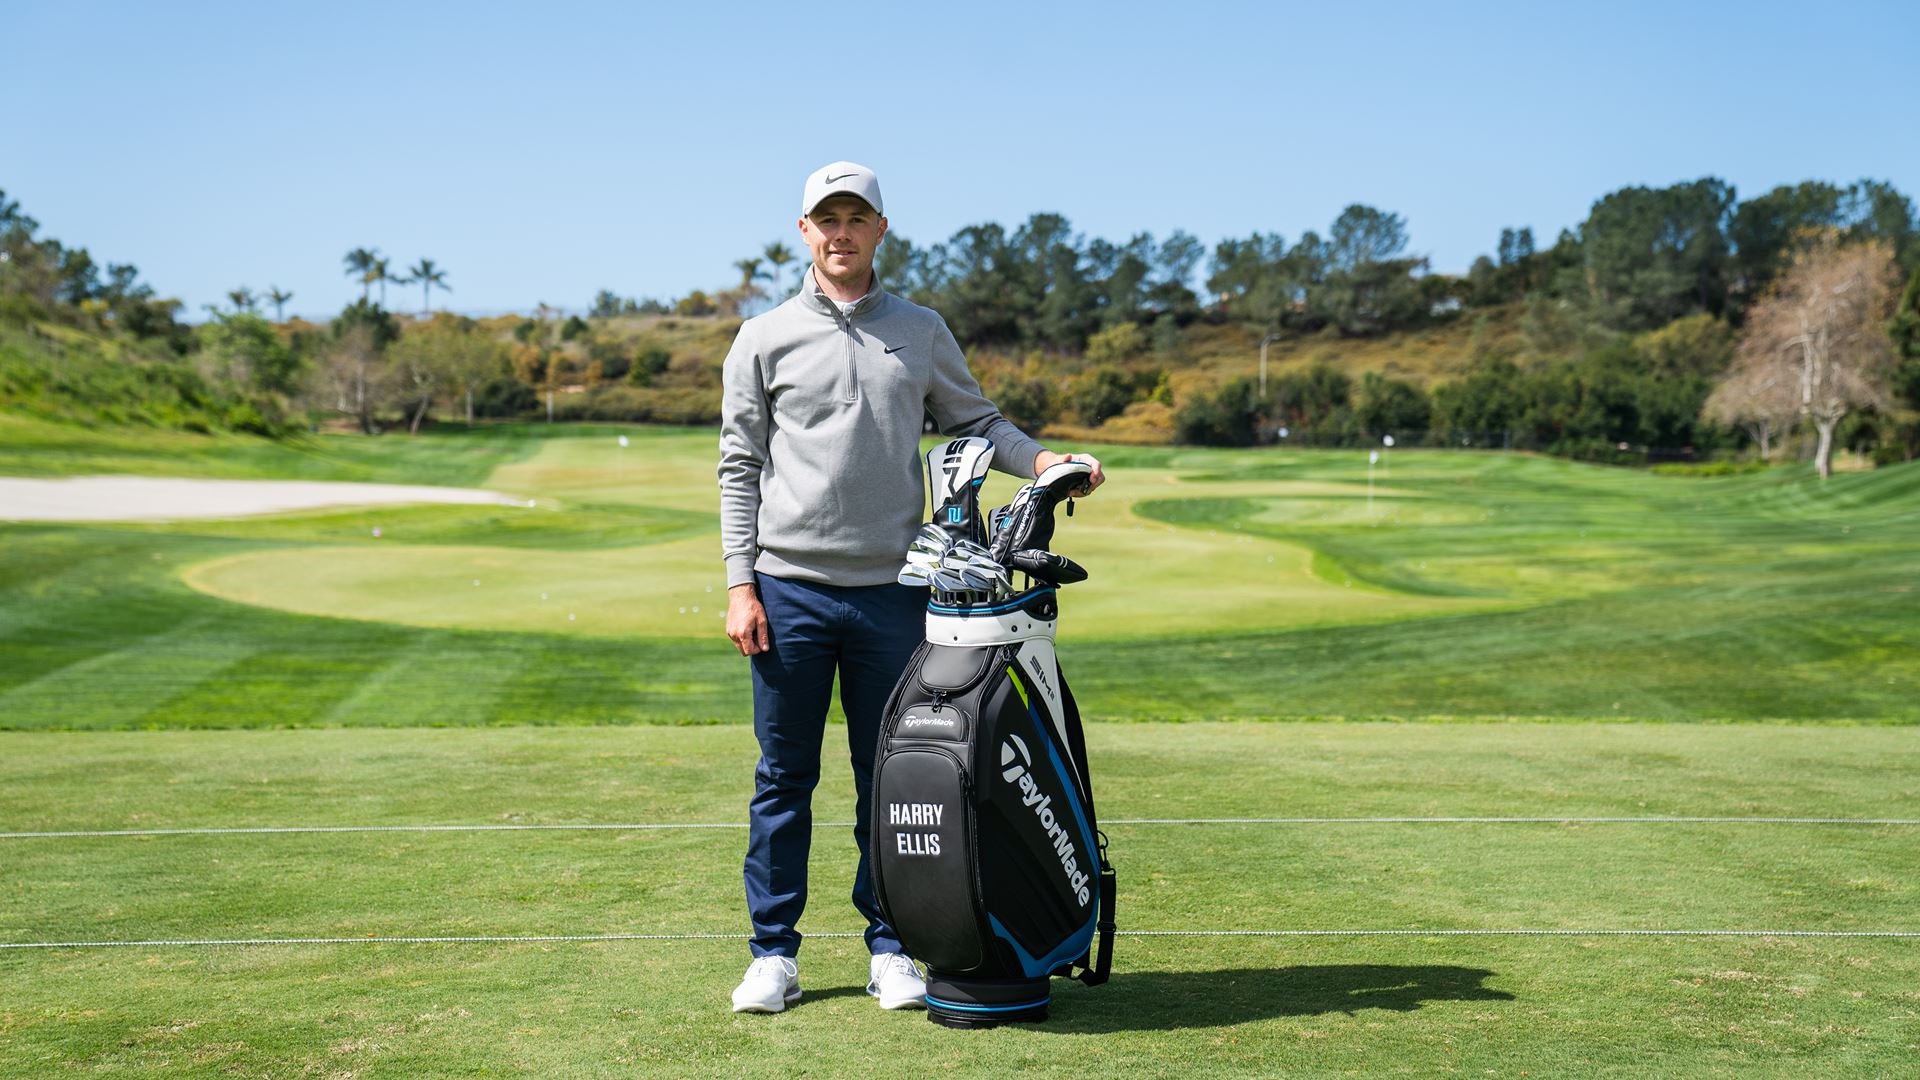 Harry Ellis Joins Team TaylorMade After Signing Multi-Year Agreement